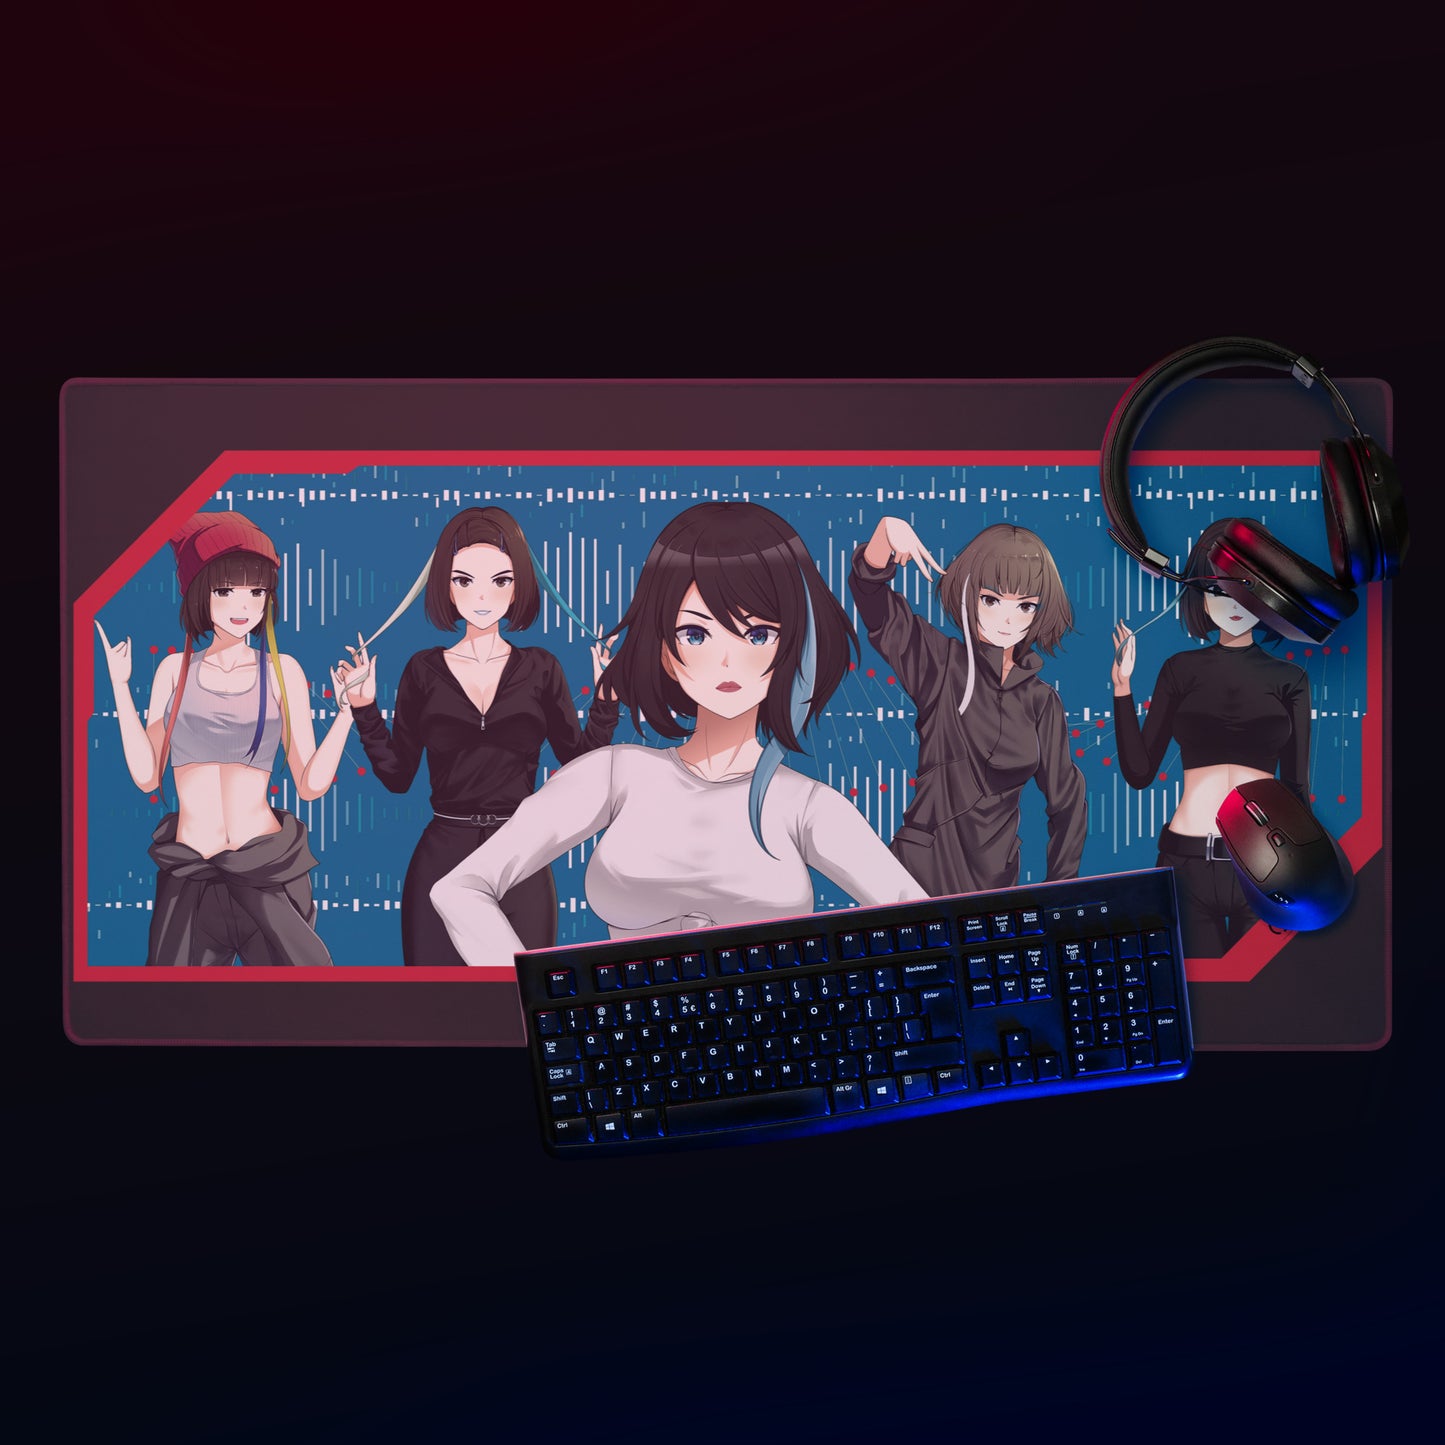 THE USUAL SUSPECTS PlayStation Girl Gaming mouse pad